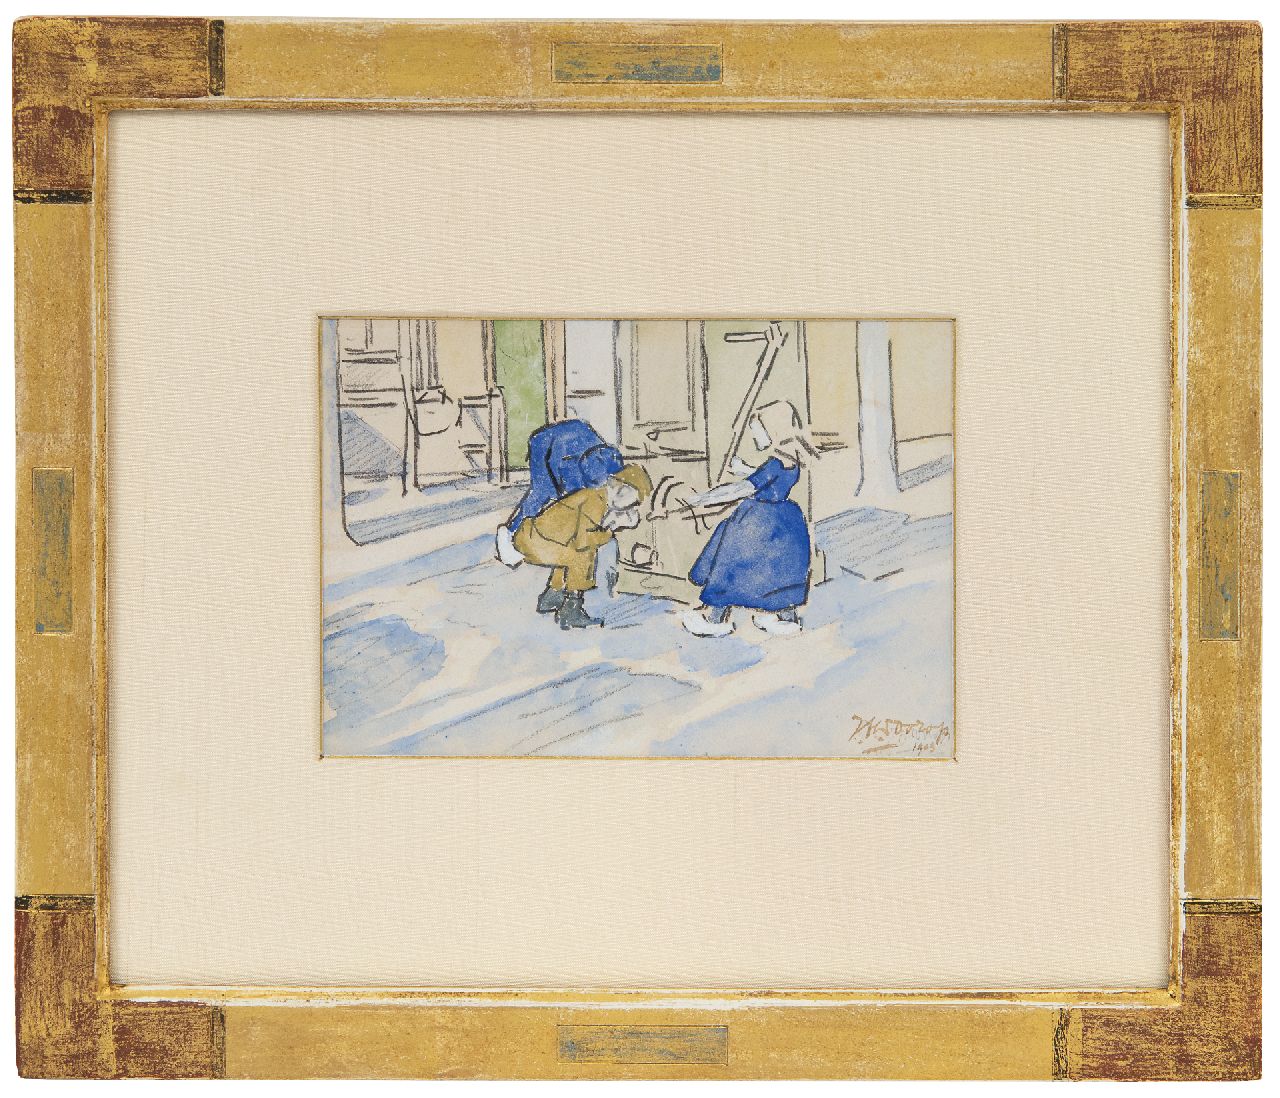 Toorop J.Th.  | Johannes Theodorus 'Jan' Toorop, Children at a village pump, black chalk and watercolour on paper 11.3 x 15.8 cm, signed l.r. (double) and dated 1903 (double)